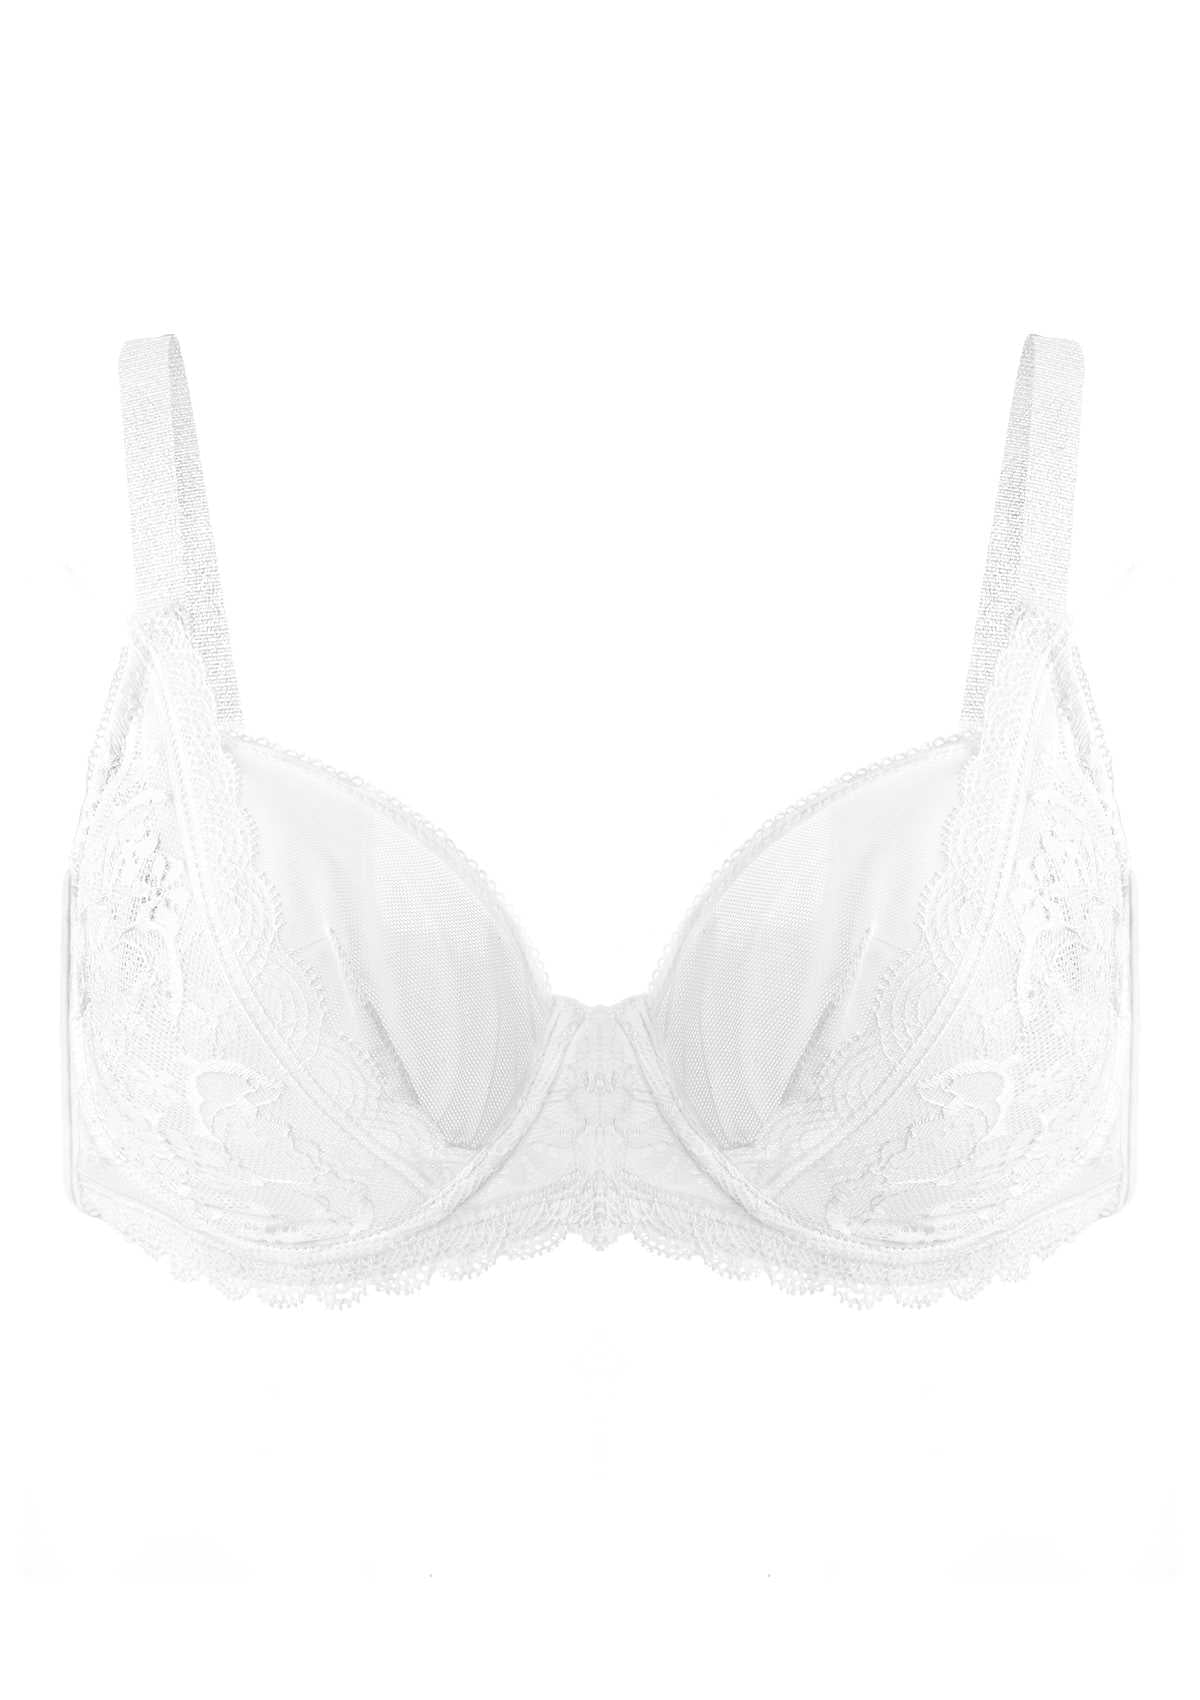 HSIA Anemone Big Bra: Best Bra For Lift And Support, Floral Bra - White / 36 / C